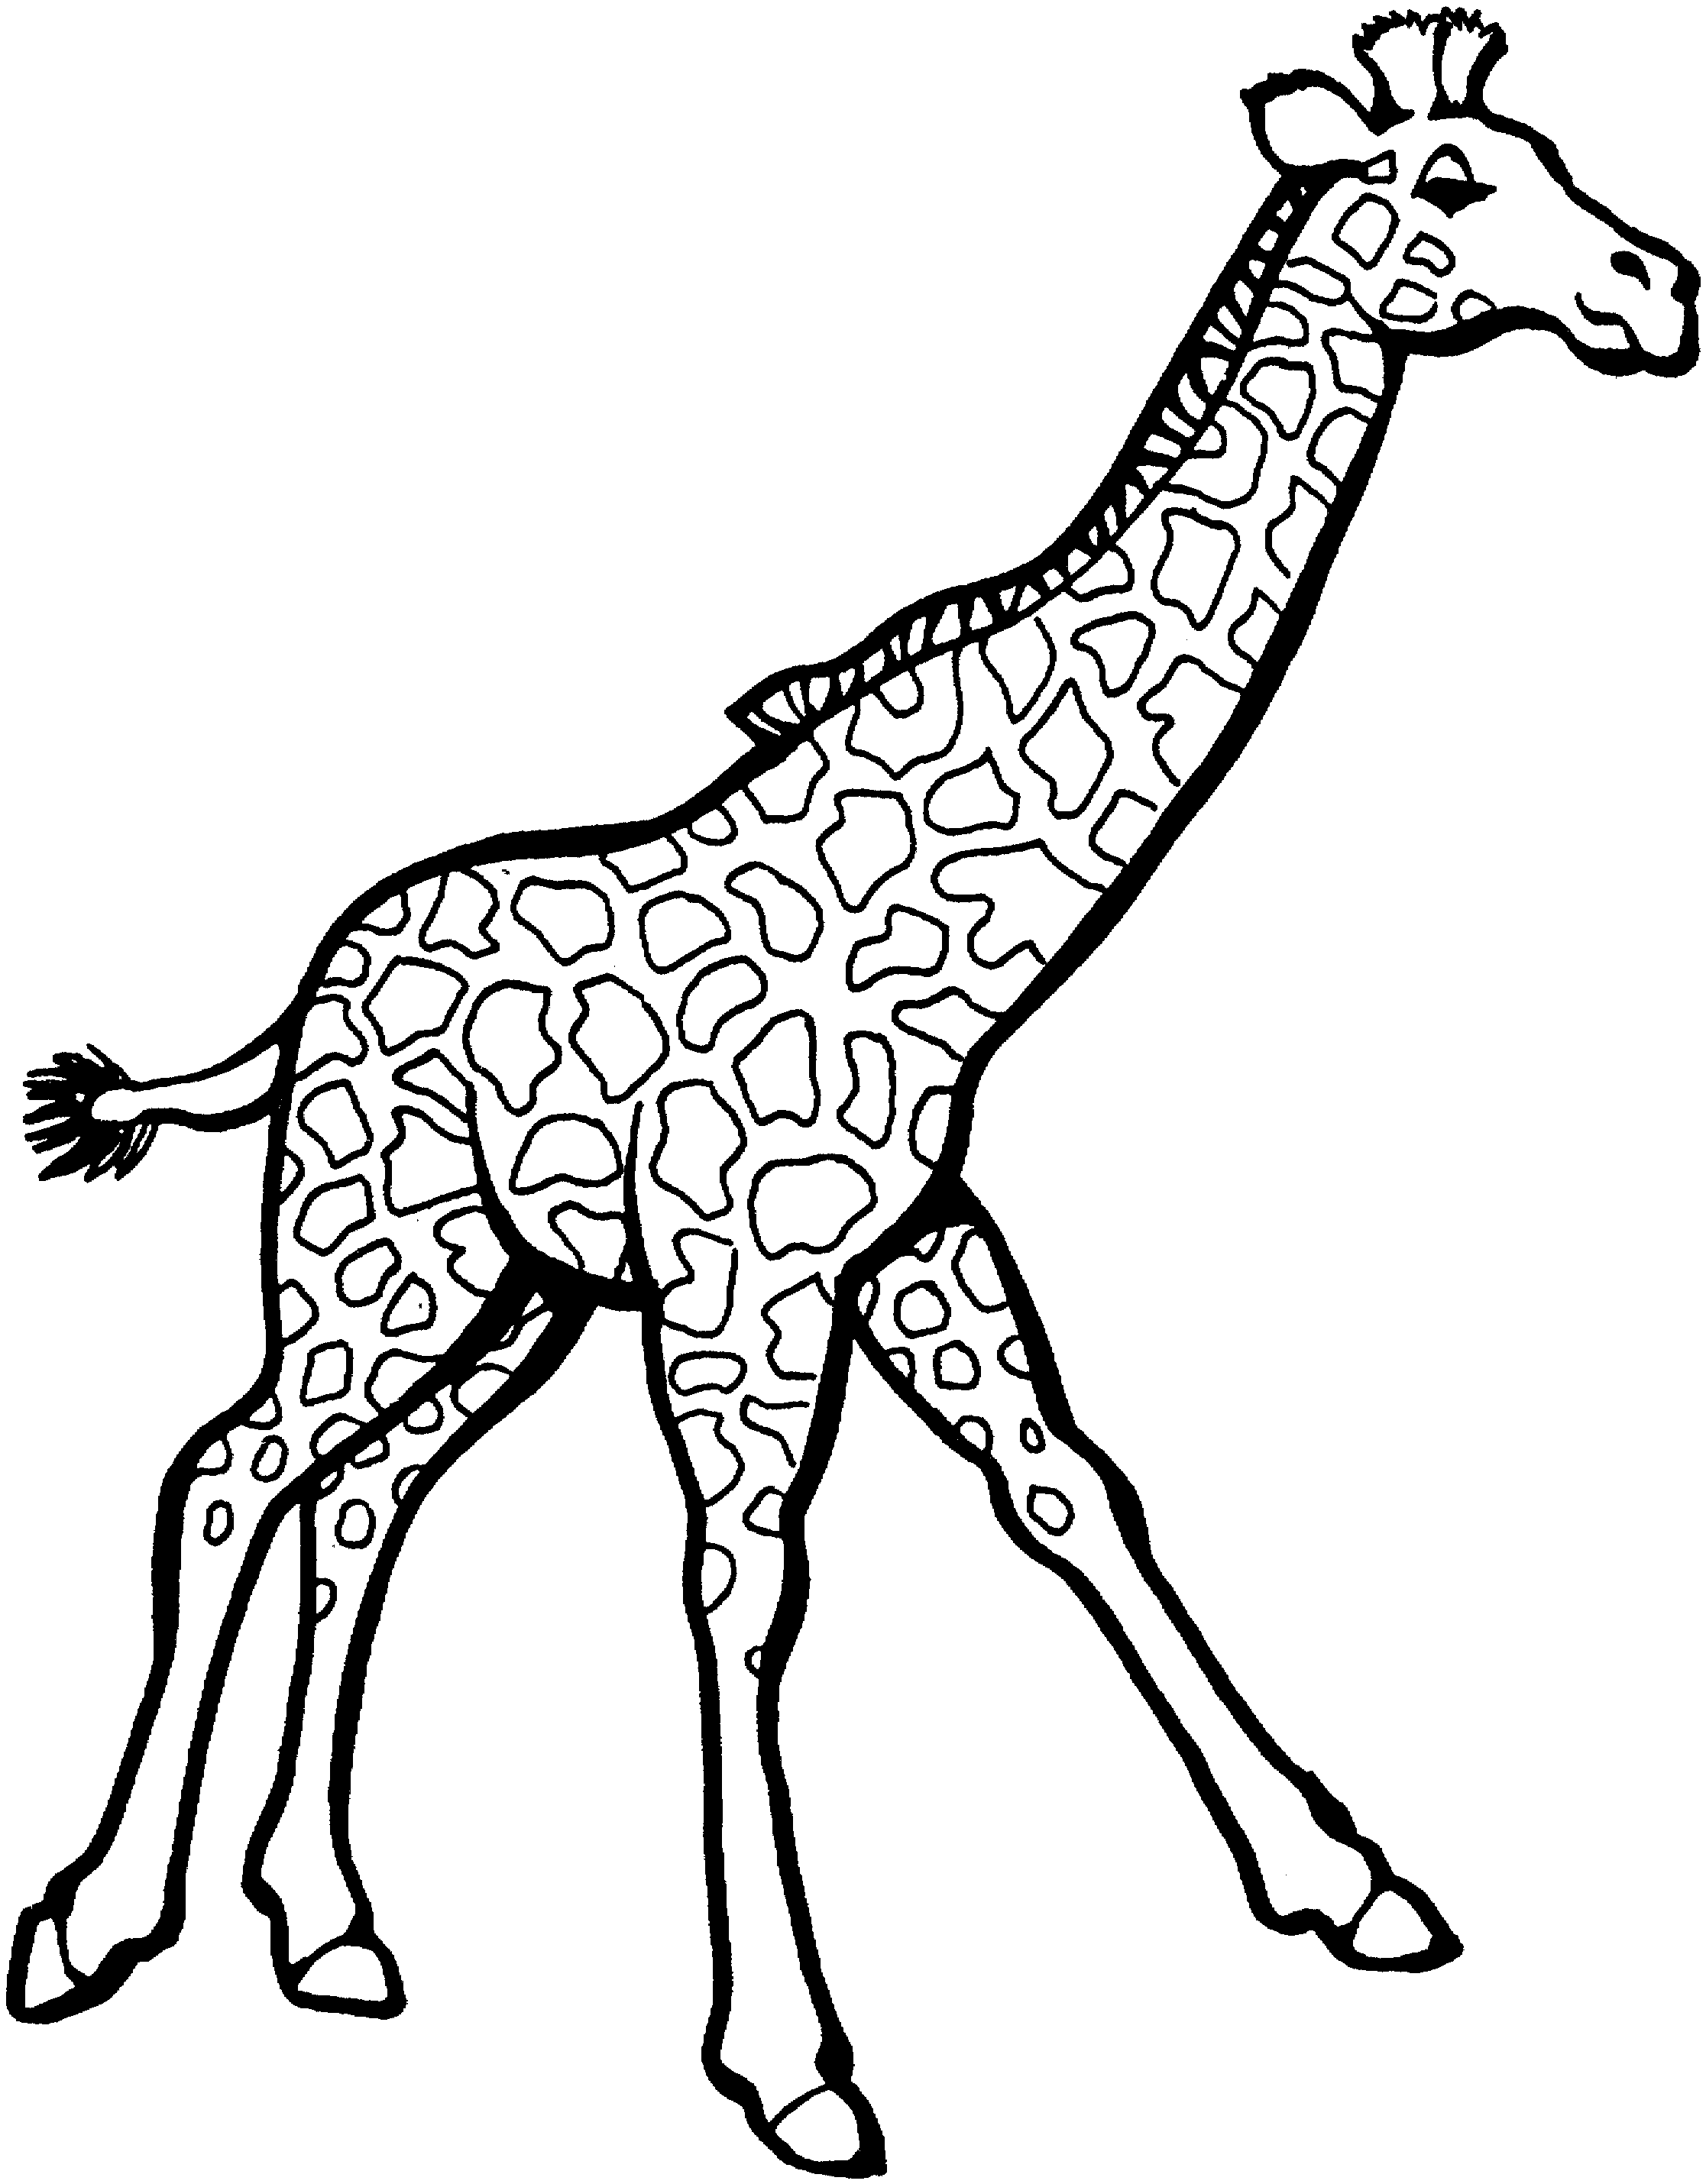 Free Wild Animal Coloring Pages Giraffe 8